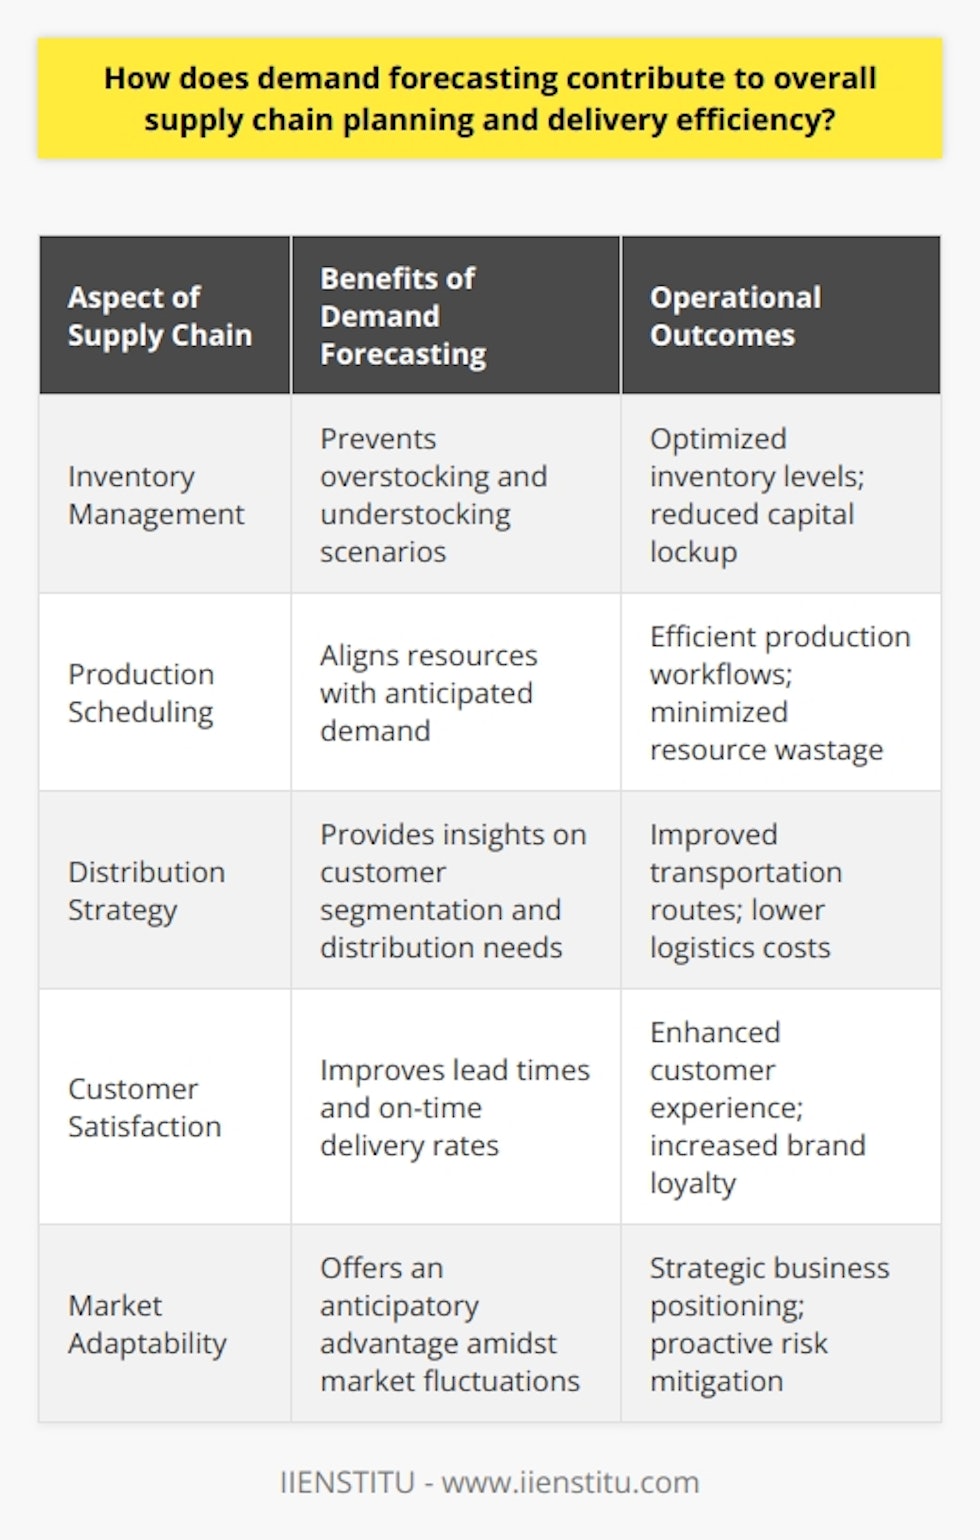 Demand forecasting serves as a keystone in the arch of supply chain management, underpinning the structure of efficient operations and customer satisfaction. It involves utilizing data analytics, historical sales figures, market trends, and other predictive indicators to estimate future customer demand. The ripple effect of such forecasting touches every facet of supply chain planning, leading to a harmonization of resources that propels delivery efficiency to its apex.At the heart of demand forecasting is the drive to strike a balance between supply and demand. By forecasting demand with precision, businesses avoid the pitfalls of inventory glut or scarcity. Optimal inventory levels ensure that capital is not tied up unnecessarily, and products are less likely to become outdated or exceed their shelf life, thus preserving profit margins and operational fluidity.Further translating forecast insights into operational strategy, production scheduling becomes more than a guessing game. It evolves into a finely tuned system where machinery, labor, and materials are aligned with forecast demand. Production can be ramped up during anticipated peaks or scaled back during lulls, facilitating a lean production model that eschews the wastage of resources and capital expenditure.The echoes of demand forecasting also reverberate through the corridors of distribution strategy. A prescient understanding of where and when products will be needed shapes the deployment of logistics. It enables the segmentation of customer base, tailoring of inventory levels at various distribution centers, and the optimization of transportation routes and methods. This not only results in cost efficiency but also improves lead times, catapults on-time delivery rates, and enhances the overall customer experience.Moreover, demand forecasting imbues a company with the agility to navigate the unpredictable currents of market trends. It allows a proactive posture amidst evolving industry landscapes, consumer preferences, and economic changes. In essence, it furnishes a strategic advantage, offering an anticipatory stance to capitalize on opportunities and mitigate potential risks.To encapsulate, demand forecasting is the lynchpin of supply chain efficacy. It reconciles the complexities of inventory management with the operational cadence of production, serving both the custodian of cost reduction and the facilitator of prompt product delivery. It also affords a panoramic view of the market, granting companies the ability to pivot in time with the tempo of demand fluctuations. Therefore, a robust strategy in demand forecasting is not just recommended but essential for any progressive business aiming to uphold the gold standard in supply chain planning and delivery efficiency.